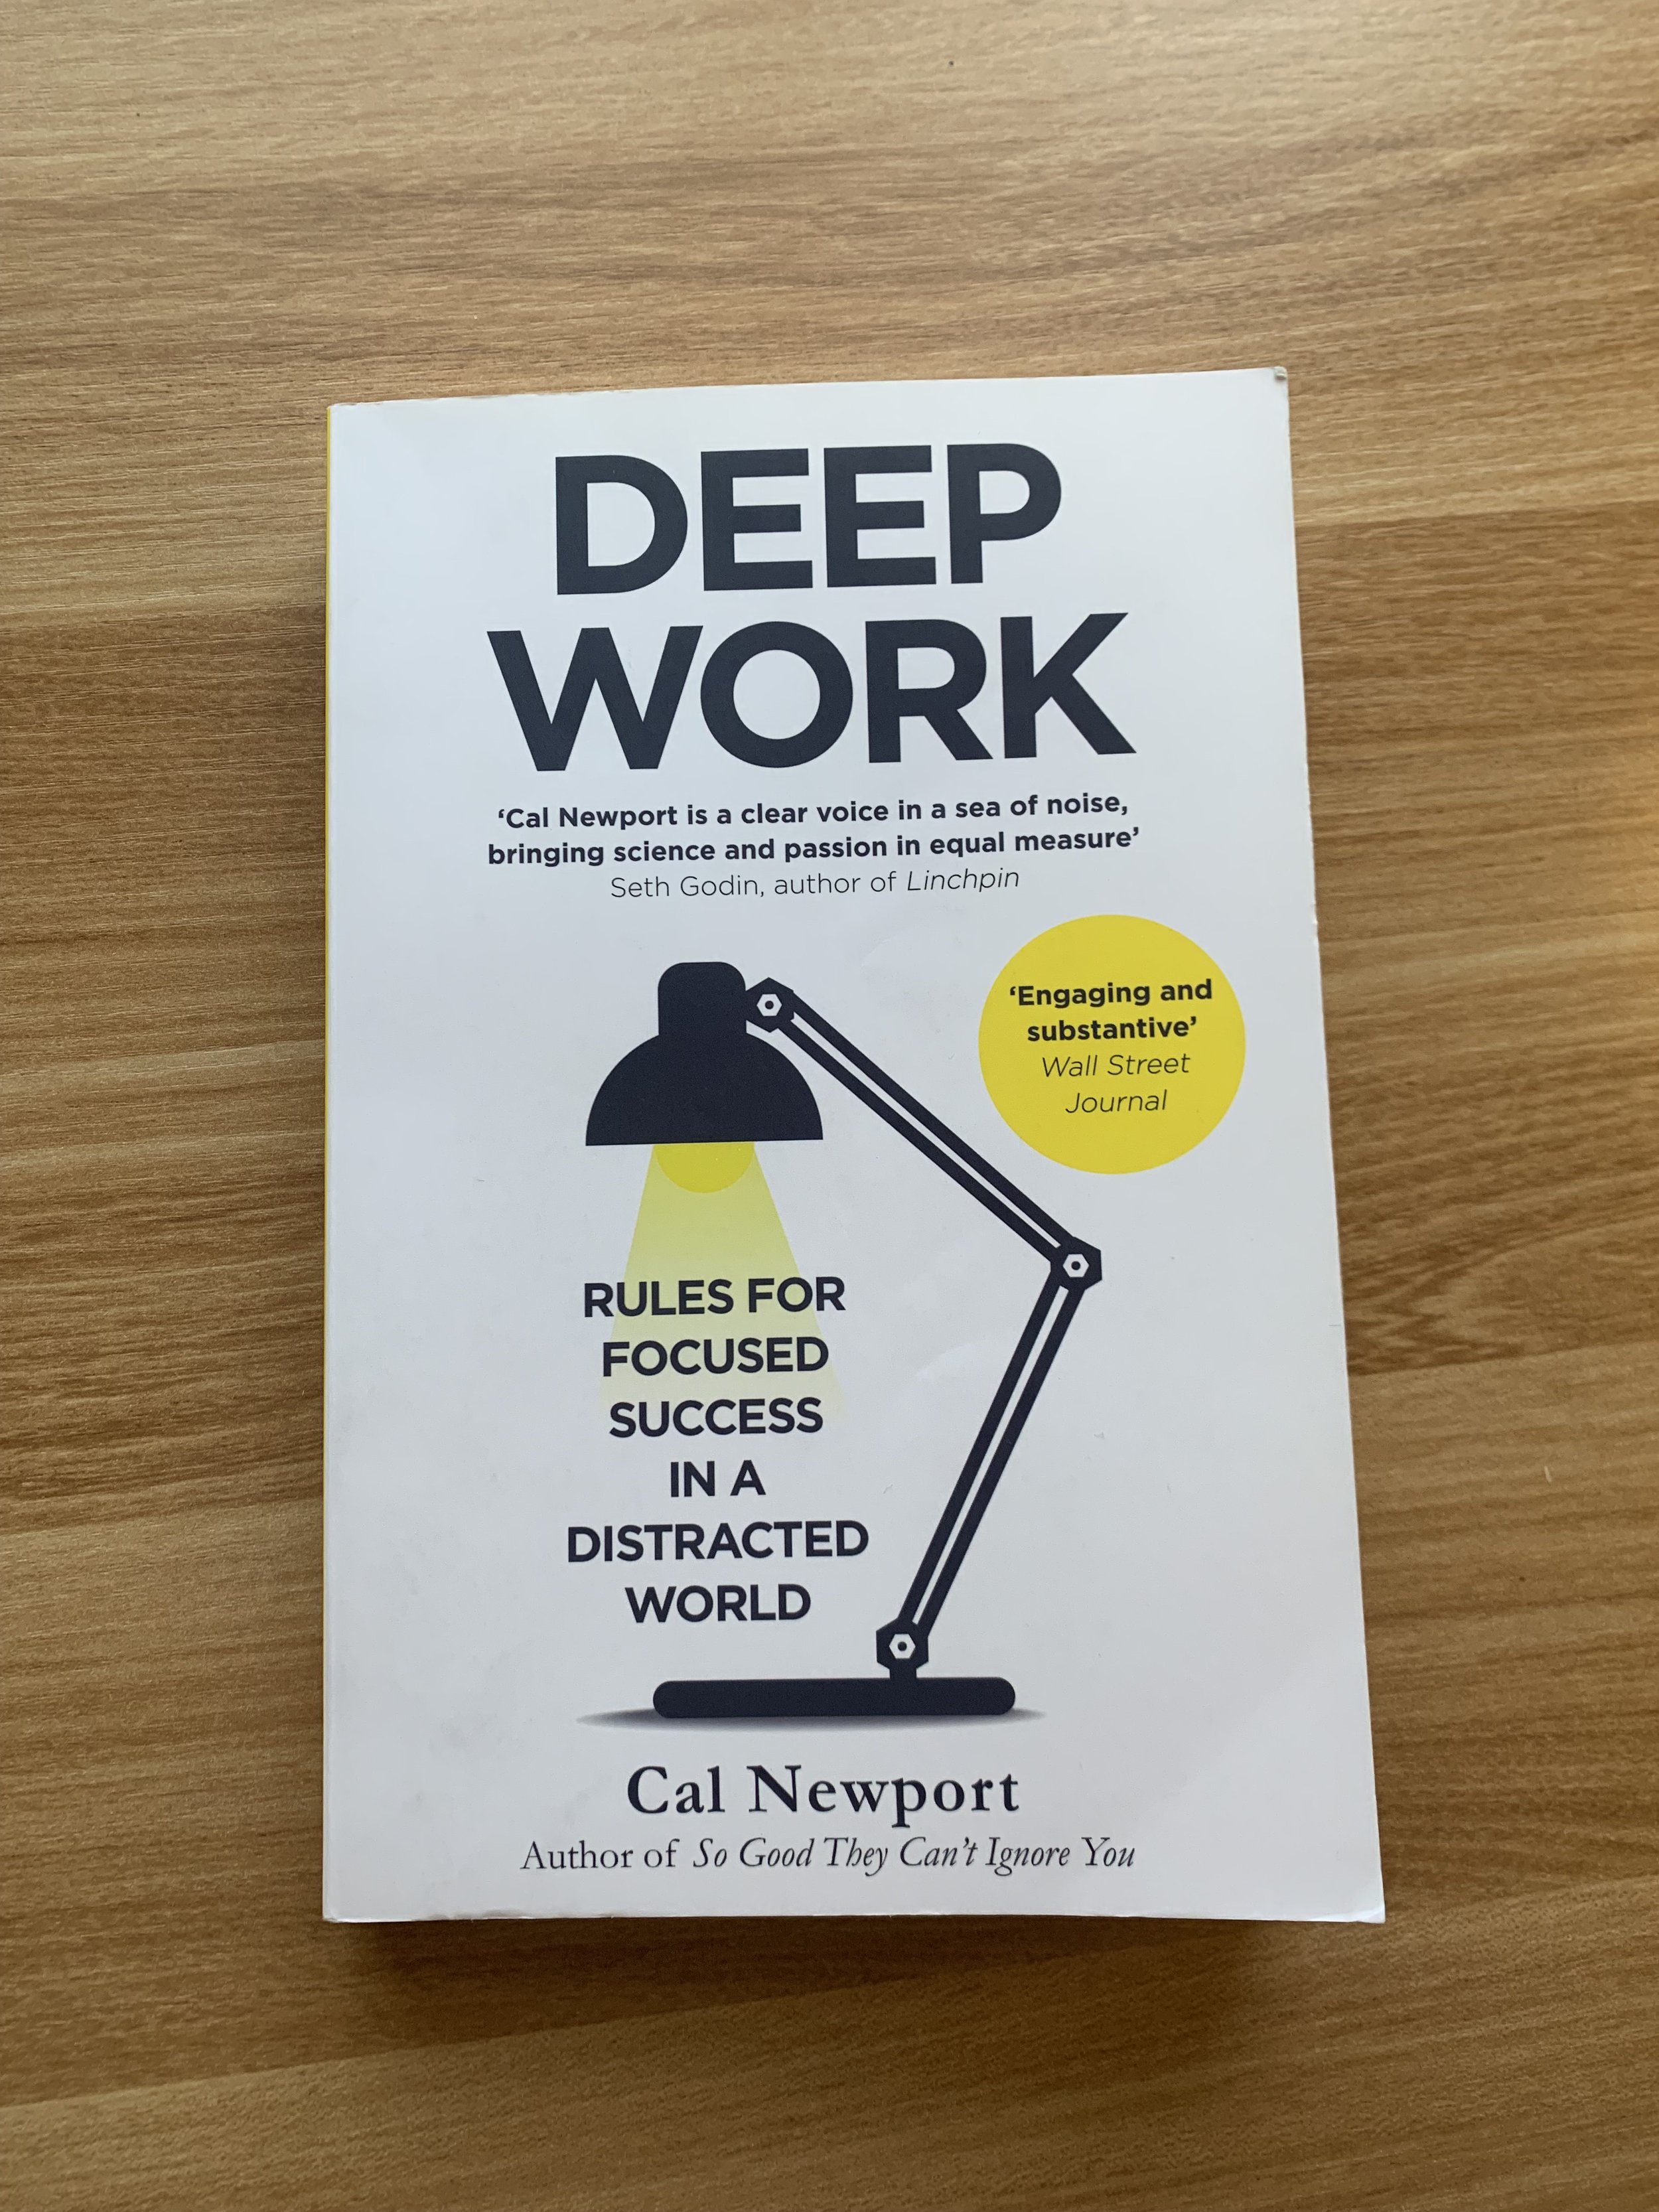 The Four Philosophies of Deep Work - Cal Newport 